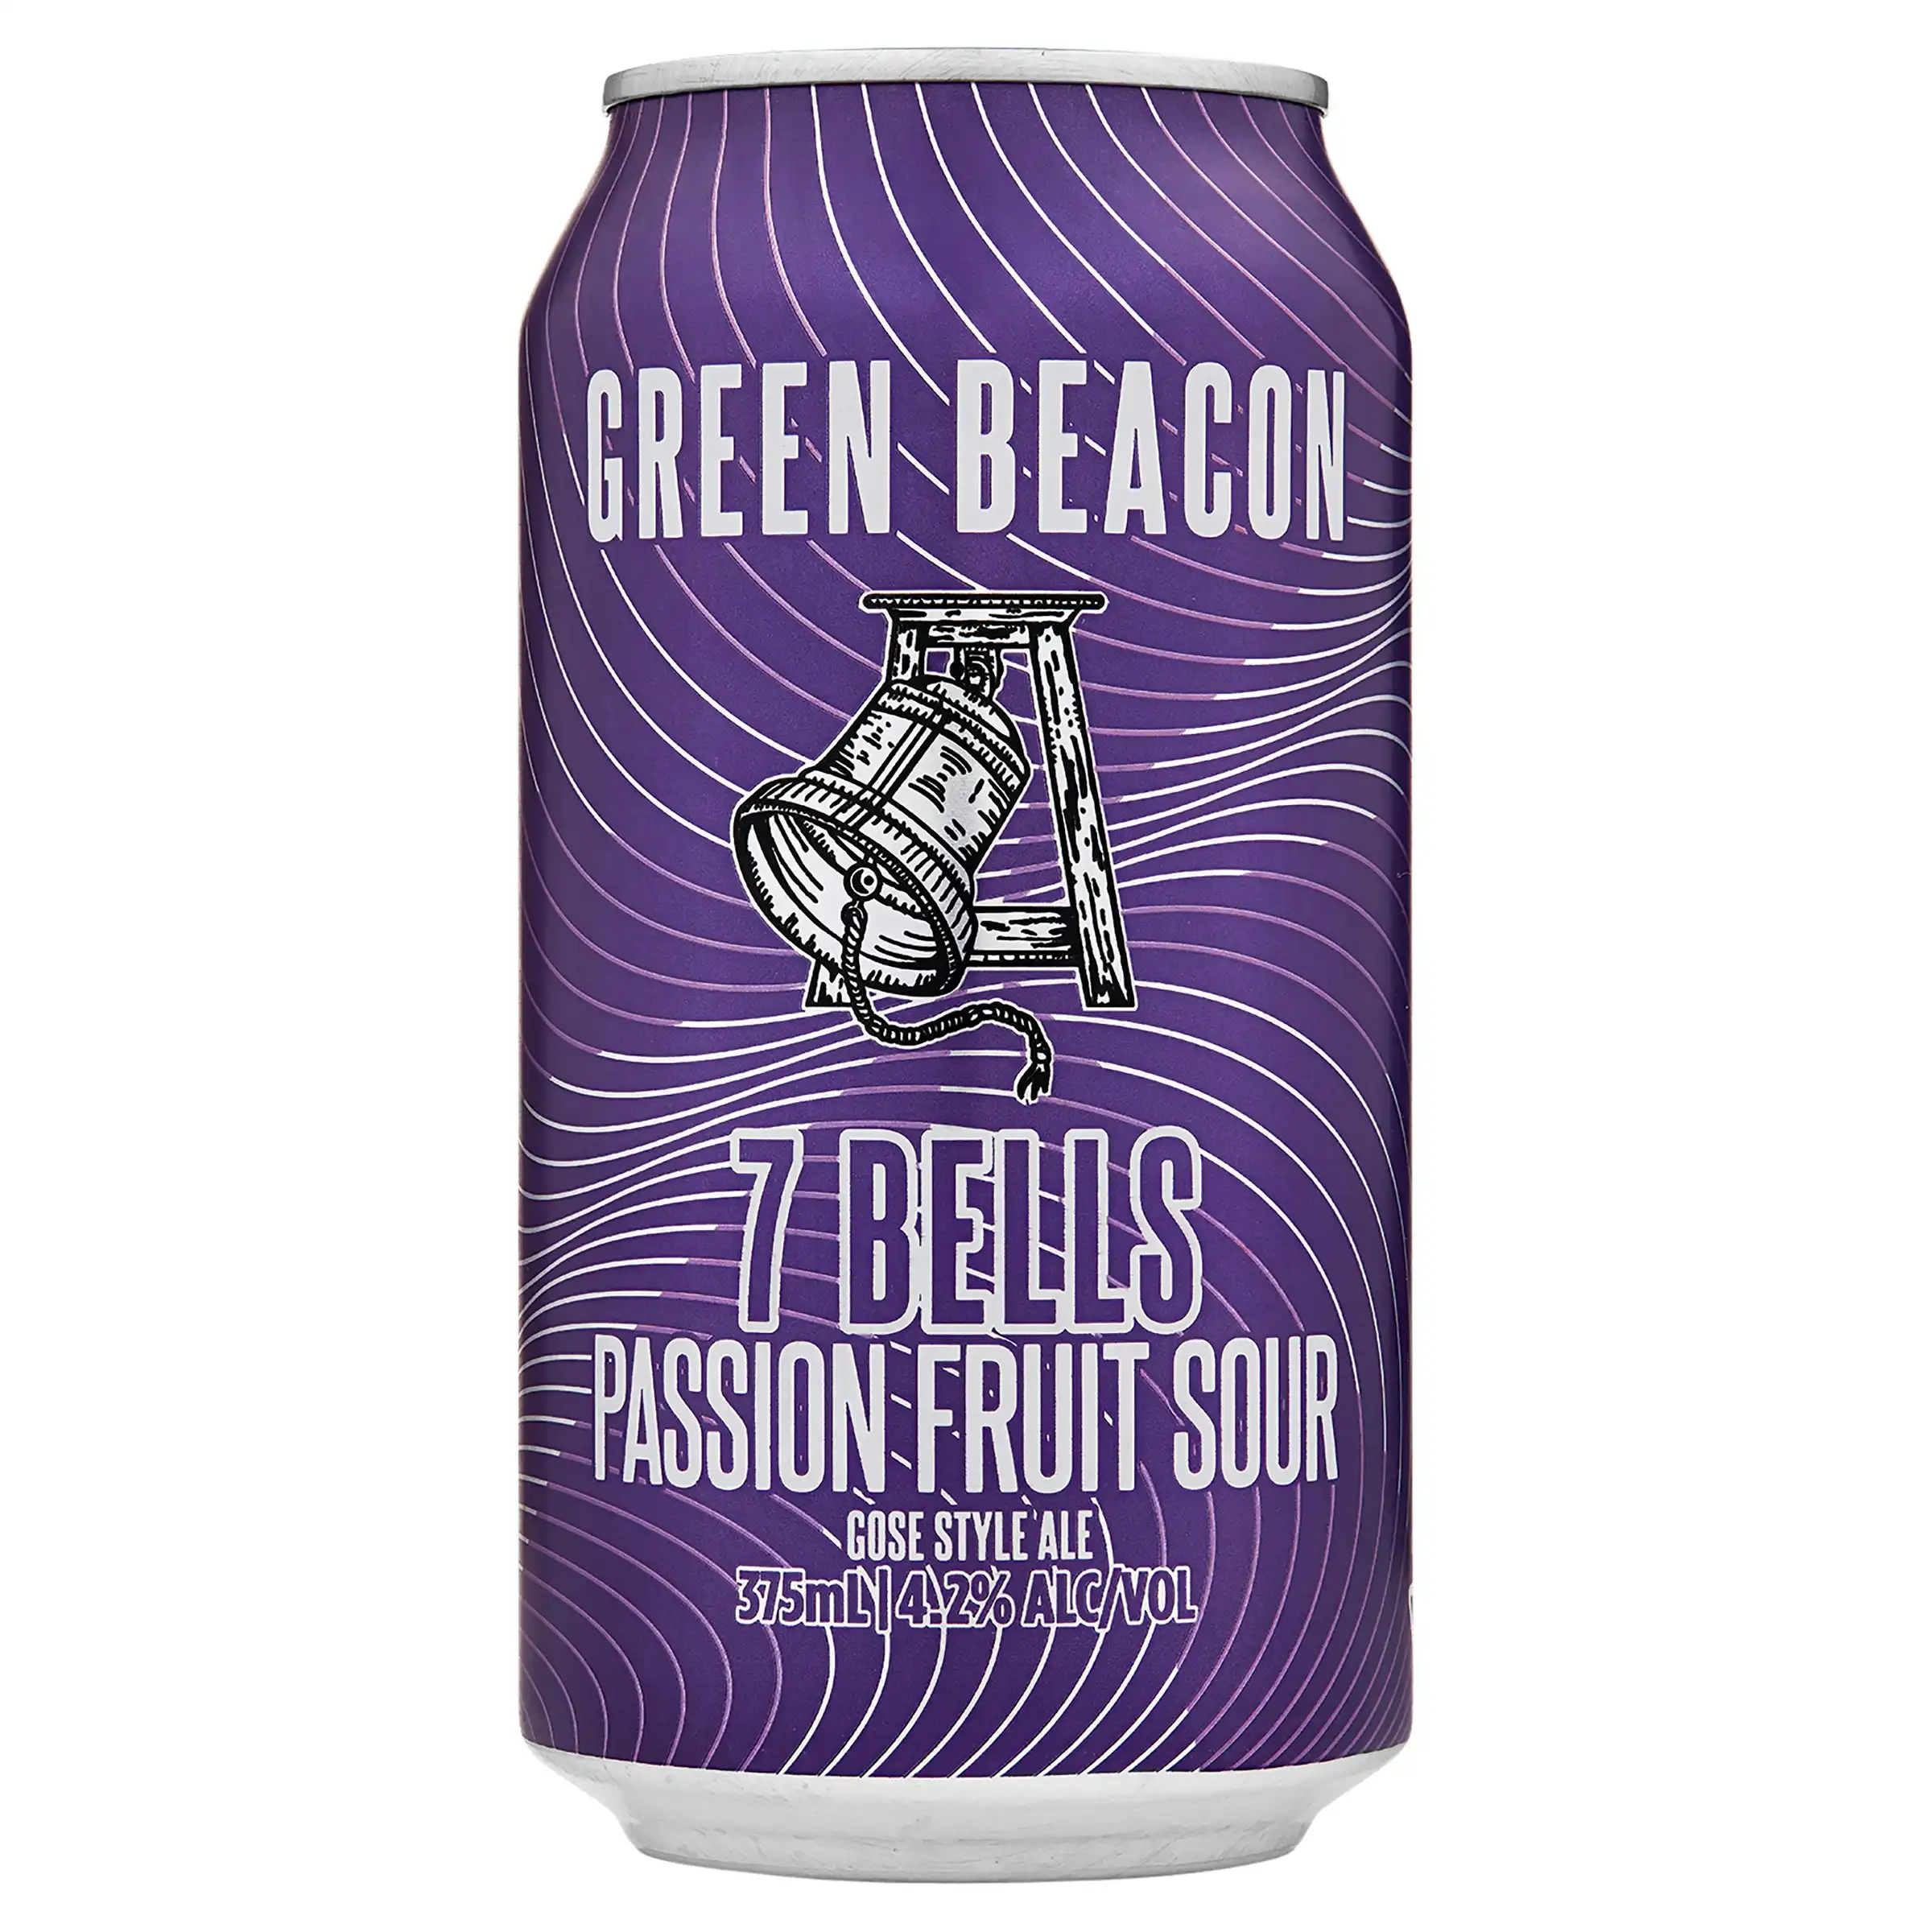 Green Beacon 7 Bells Passion Fruit Sour 375mL